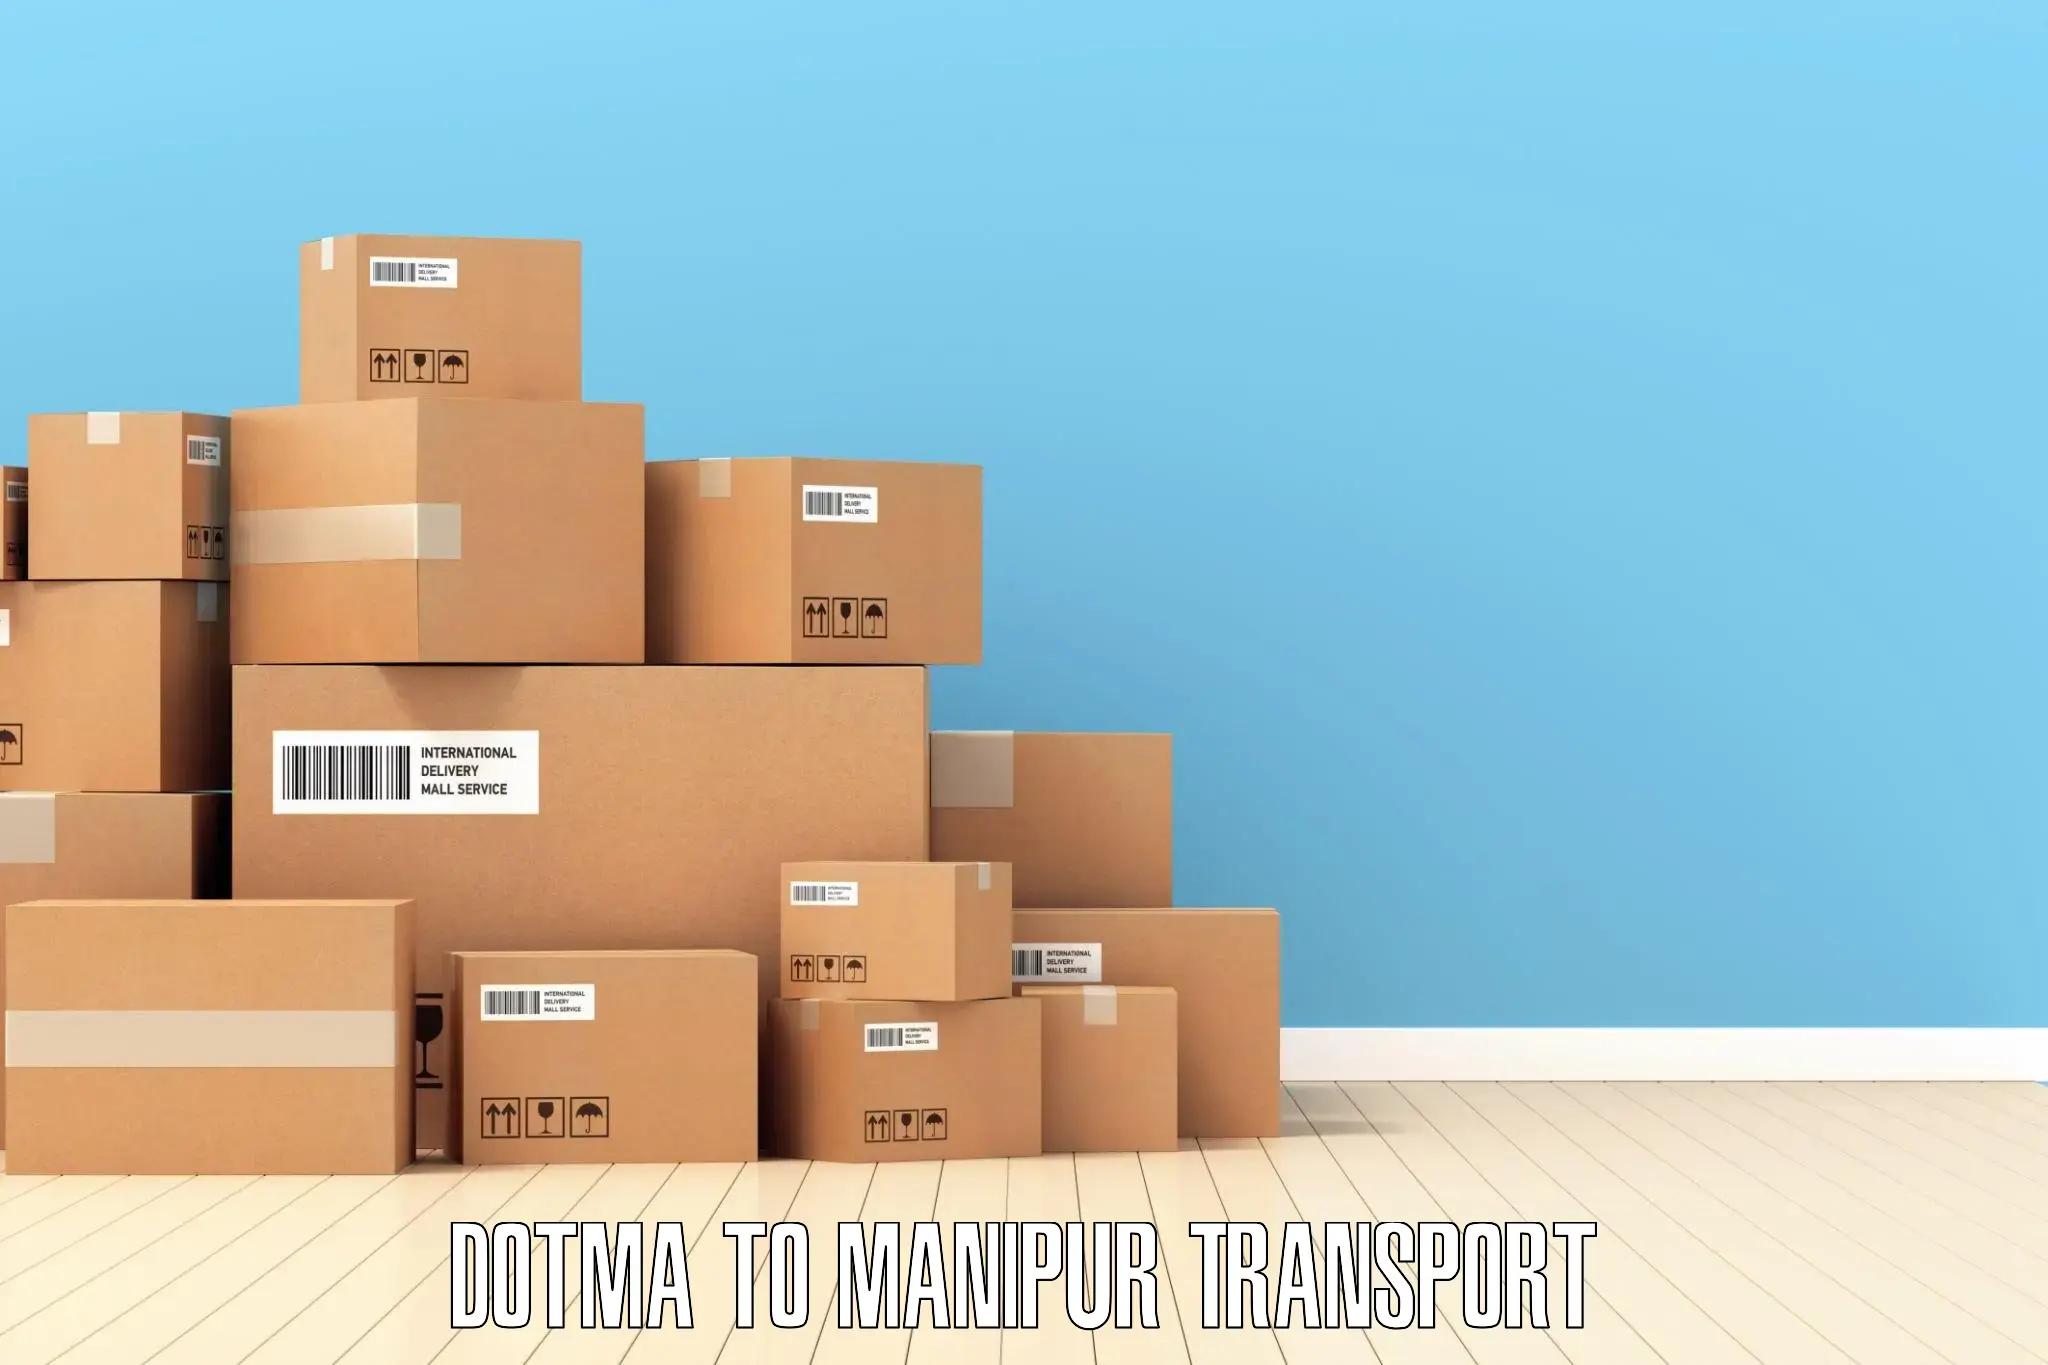 Part load transport service in India Dotma to Manipur